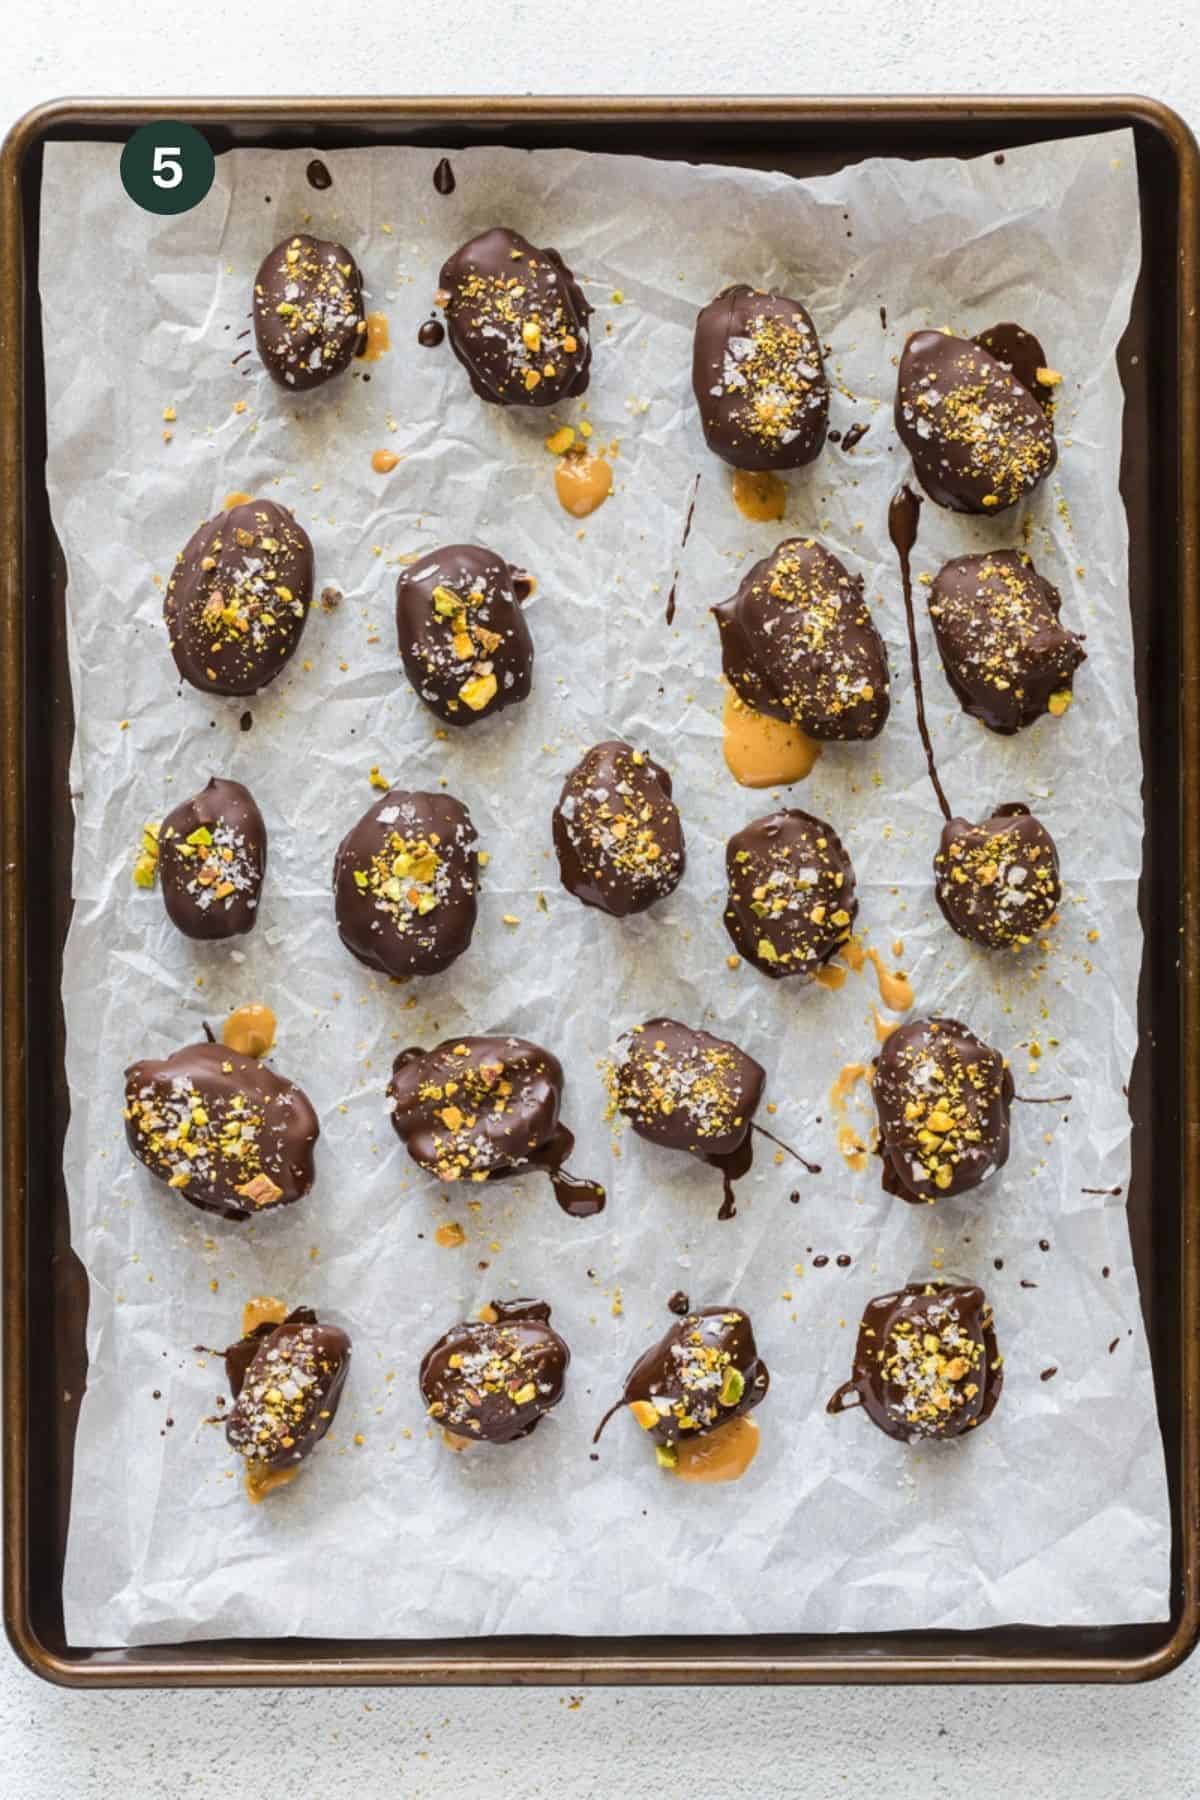 Baking sheet full of chocolate covered dates with salt and pistachios crumbled on top. 